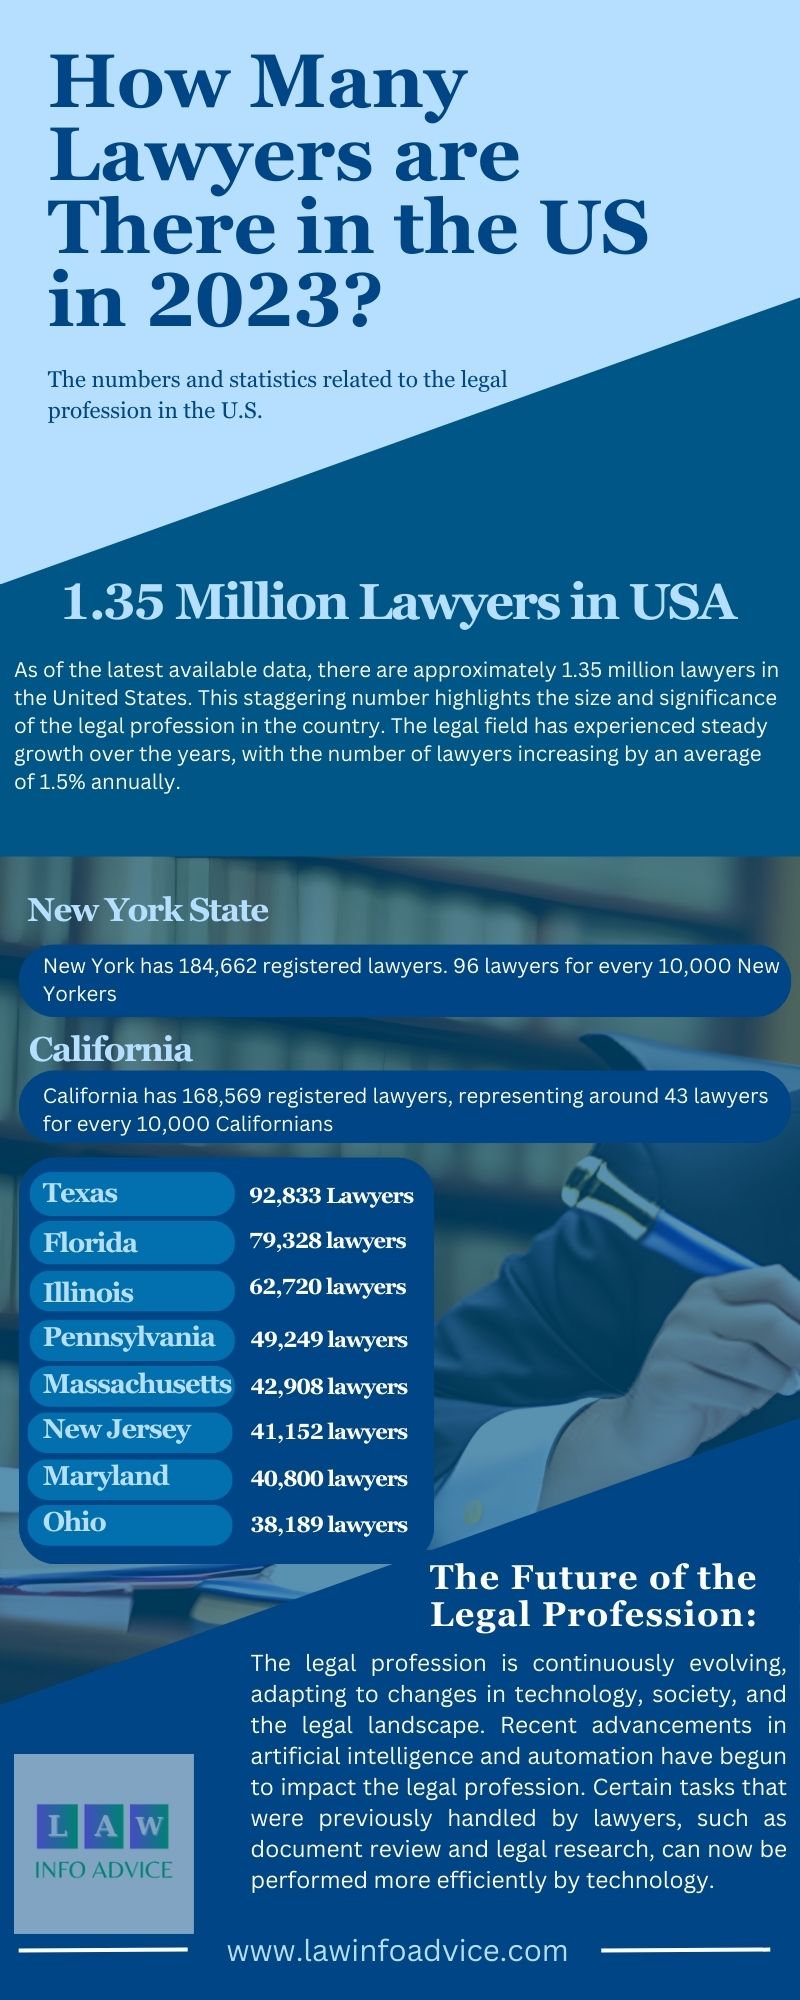 How Many Lawyers are There in the US in 2023?